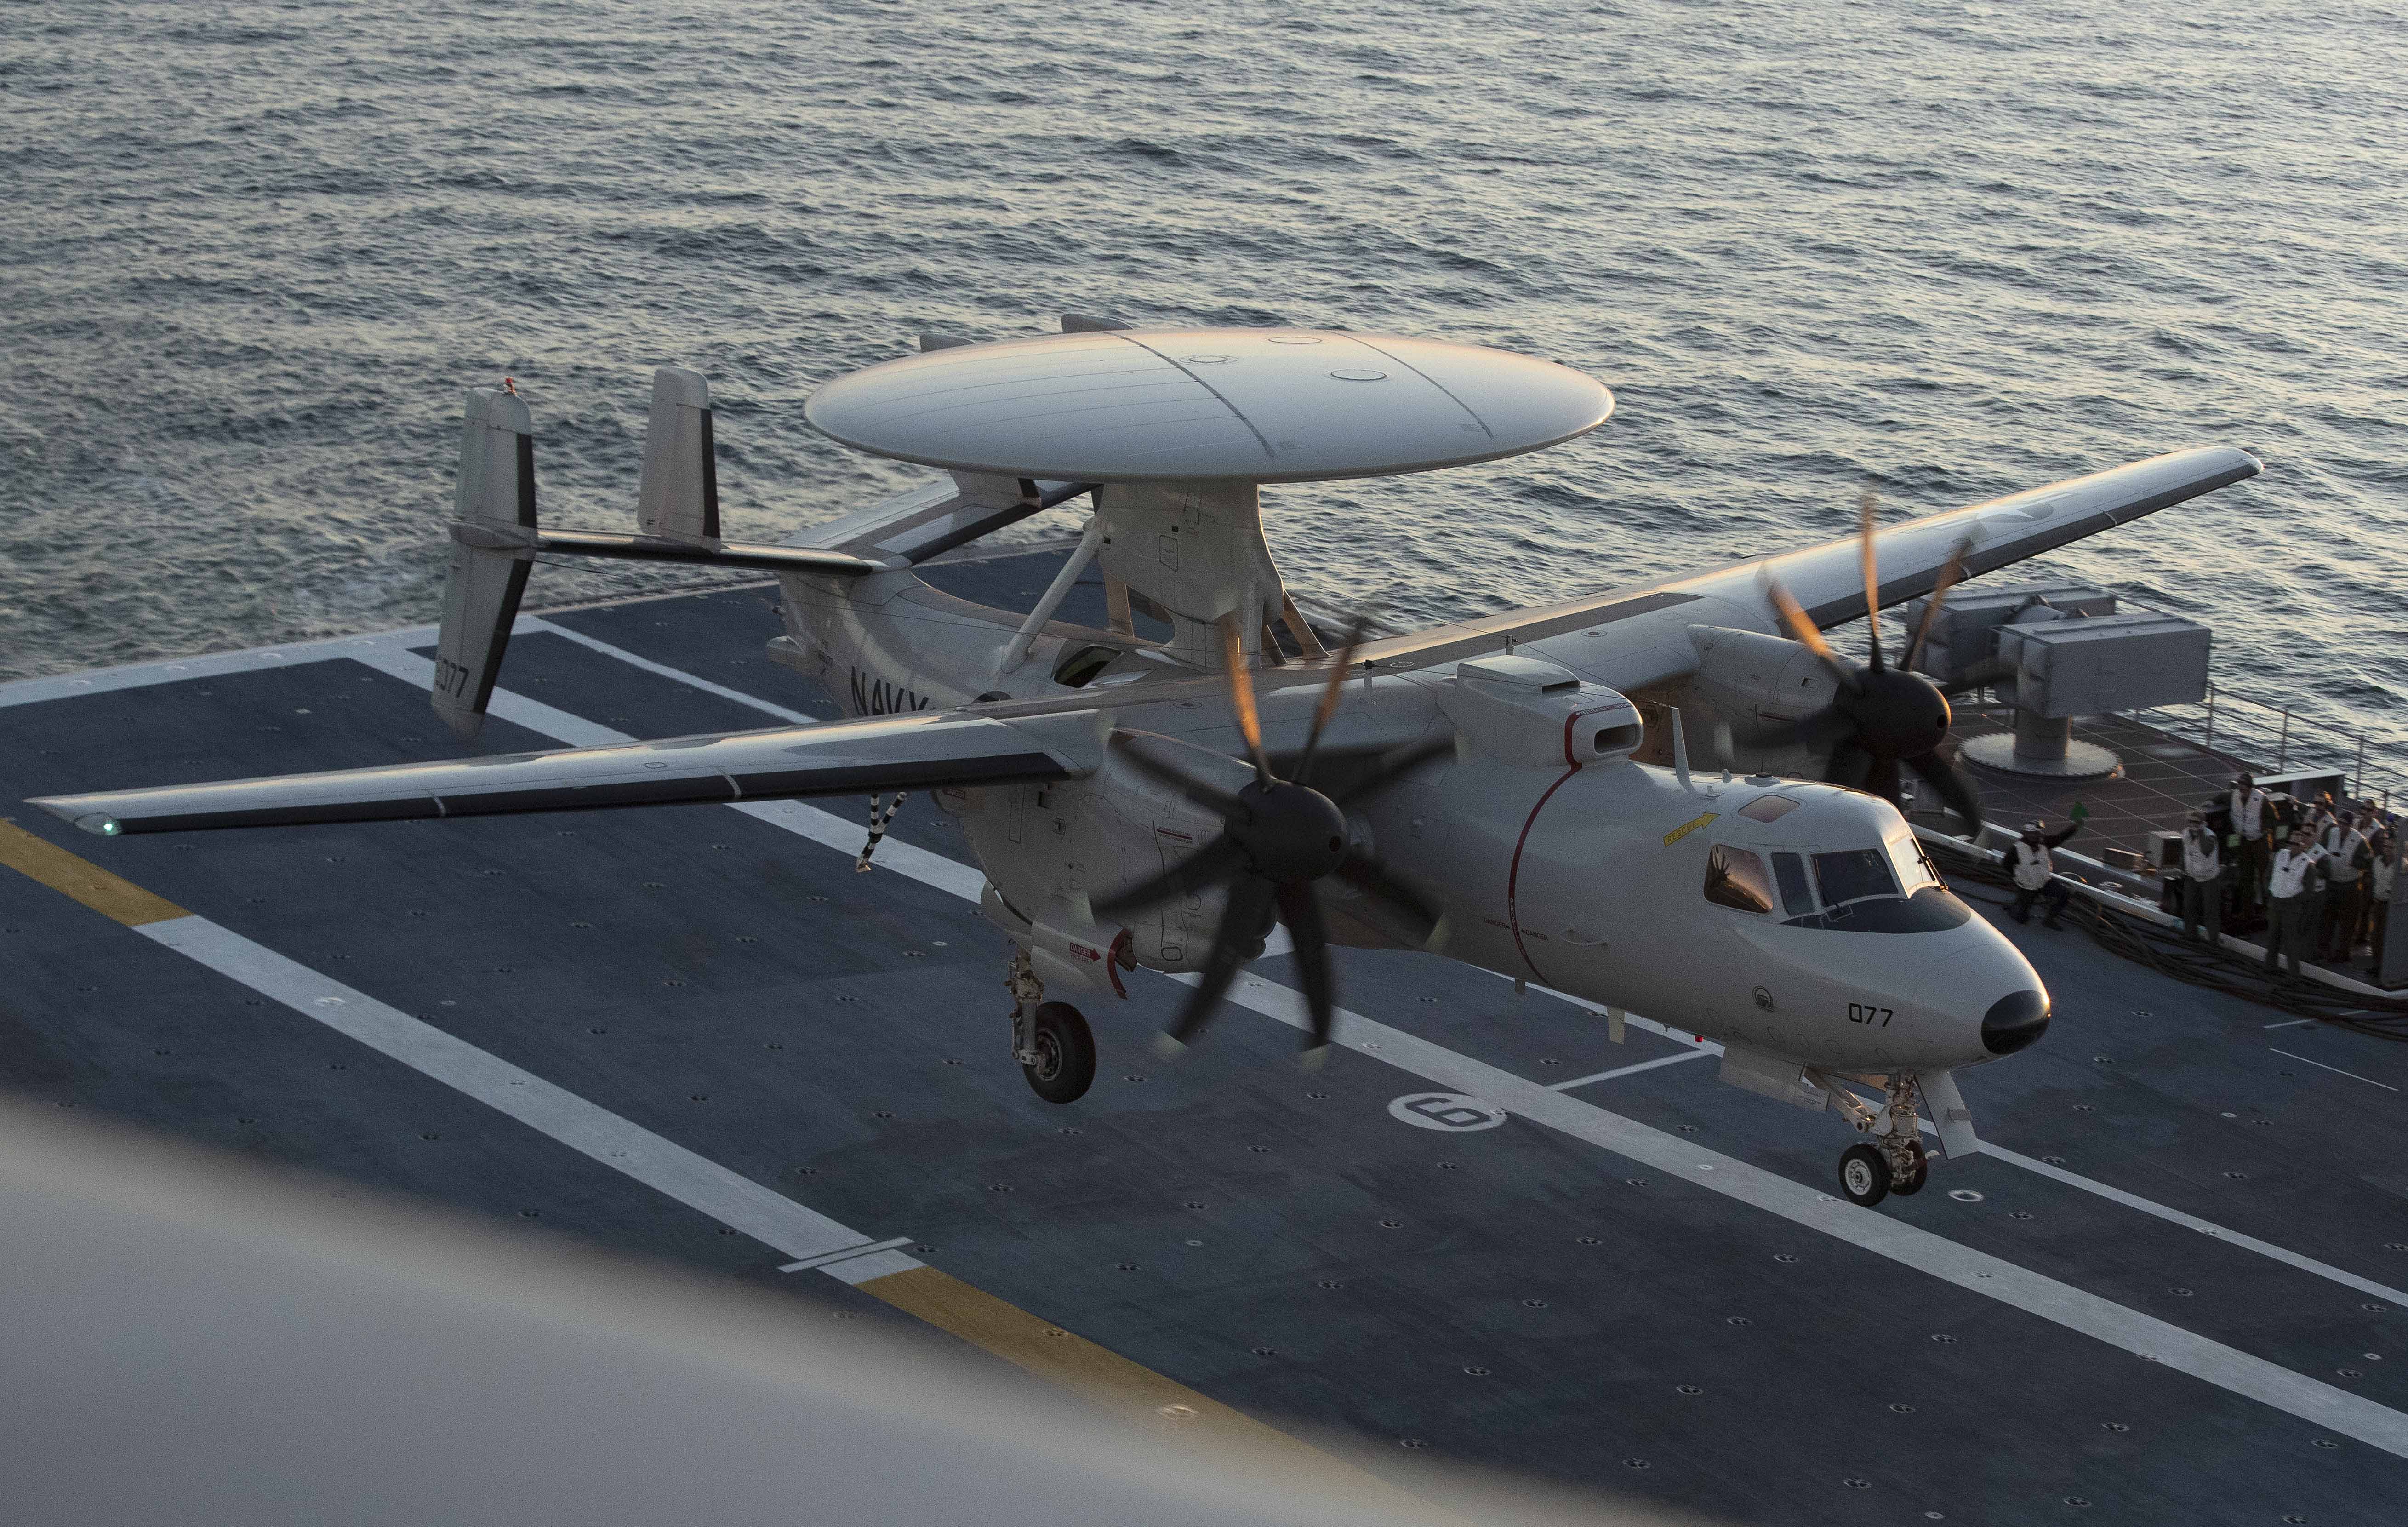 An E-2D Advanced Hawkeye assigned to Air Test and Evaluation Squadron (VX) 20 lands aboard the aircraft carrier USS Gerald R. Ford (CVN 78). Gerald R. Ford is currently conducting an independent steaming exercise. 